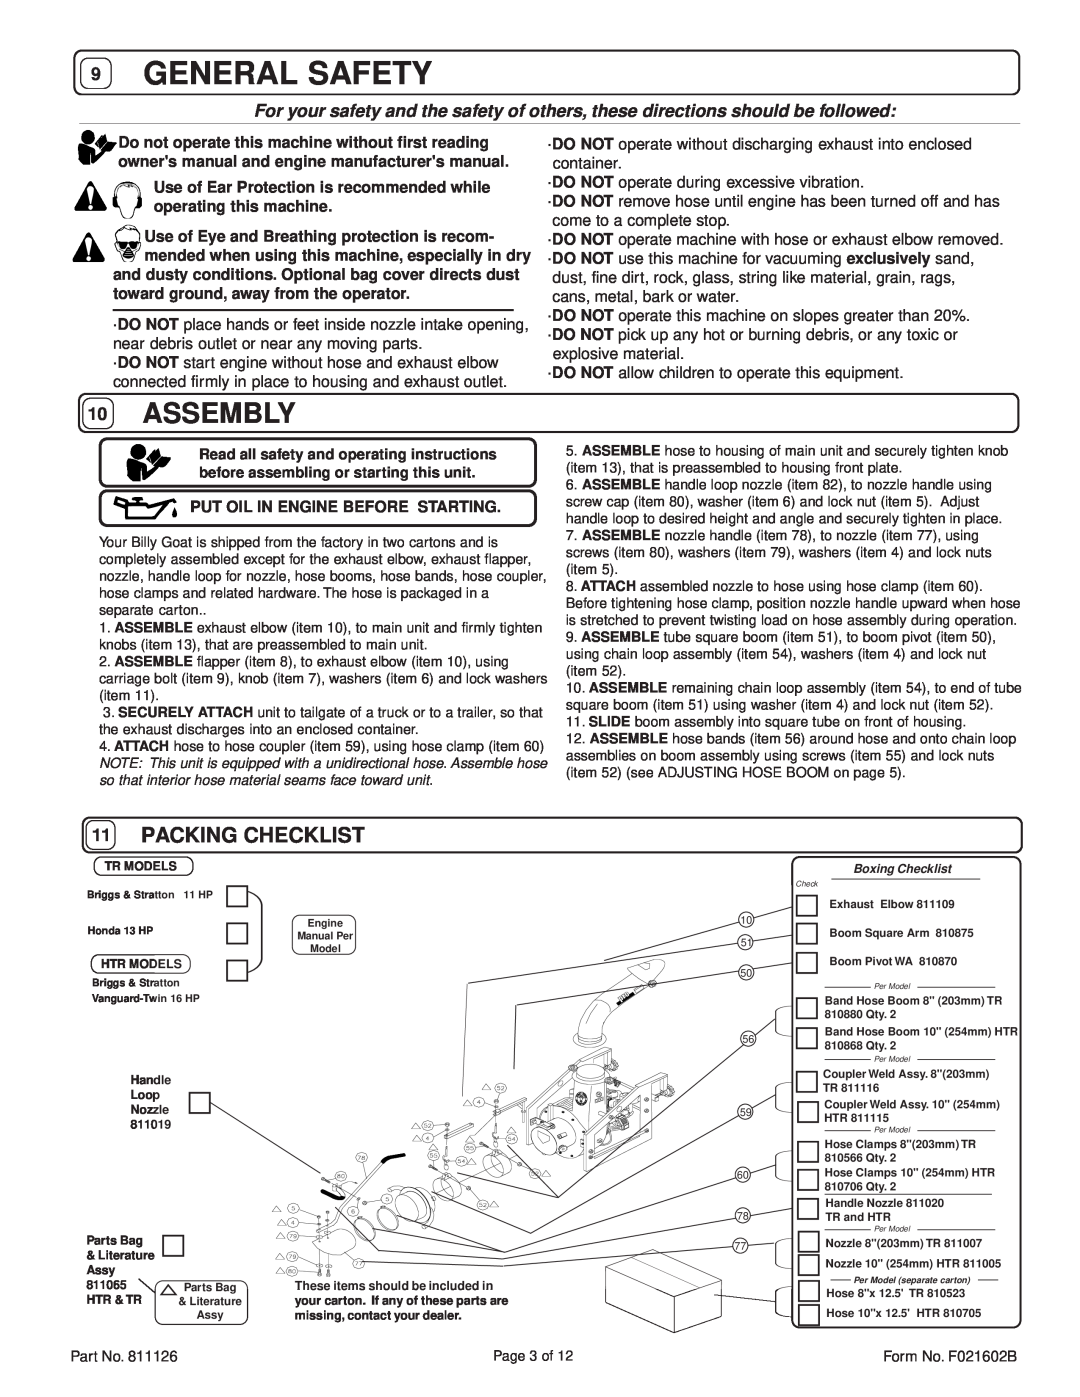 Billy Goat HTR1601V, TR1303H, TR1103 General Safety, Packing Checklist, Assembly, Put Oil In Engine Before Starting 